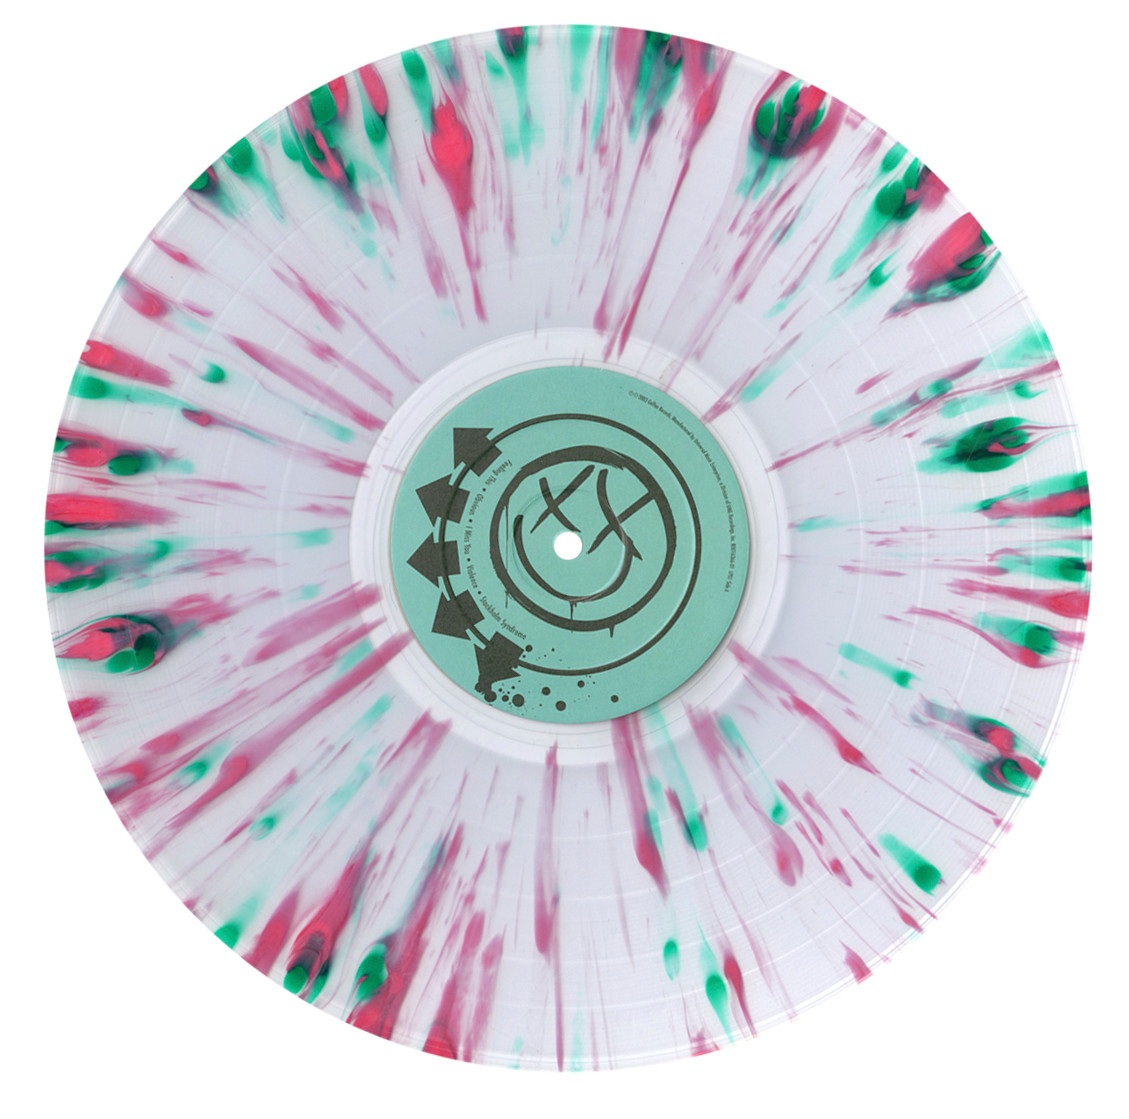 15 Splattered Vinyl Records That Are So Hypnotic You'll Have No Choice But Buy Them - UnifiedManufacturing